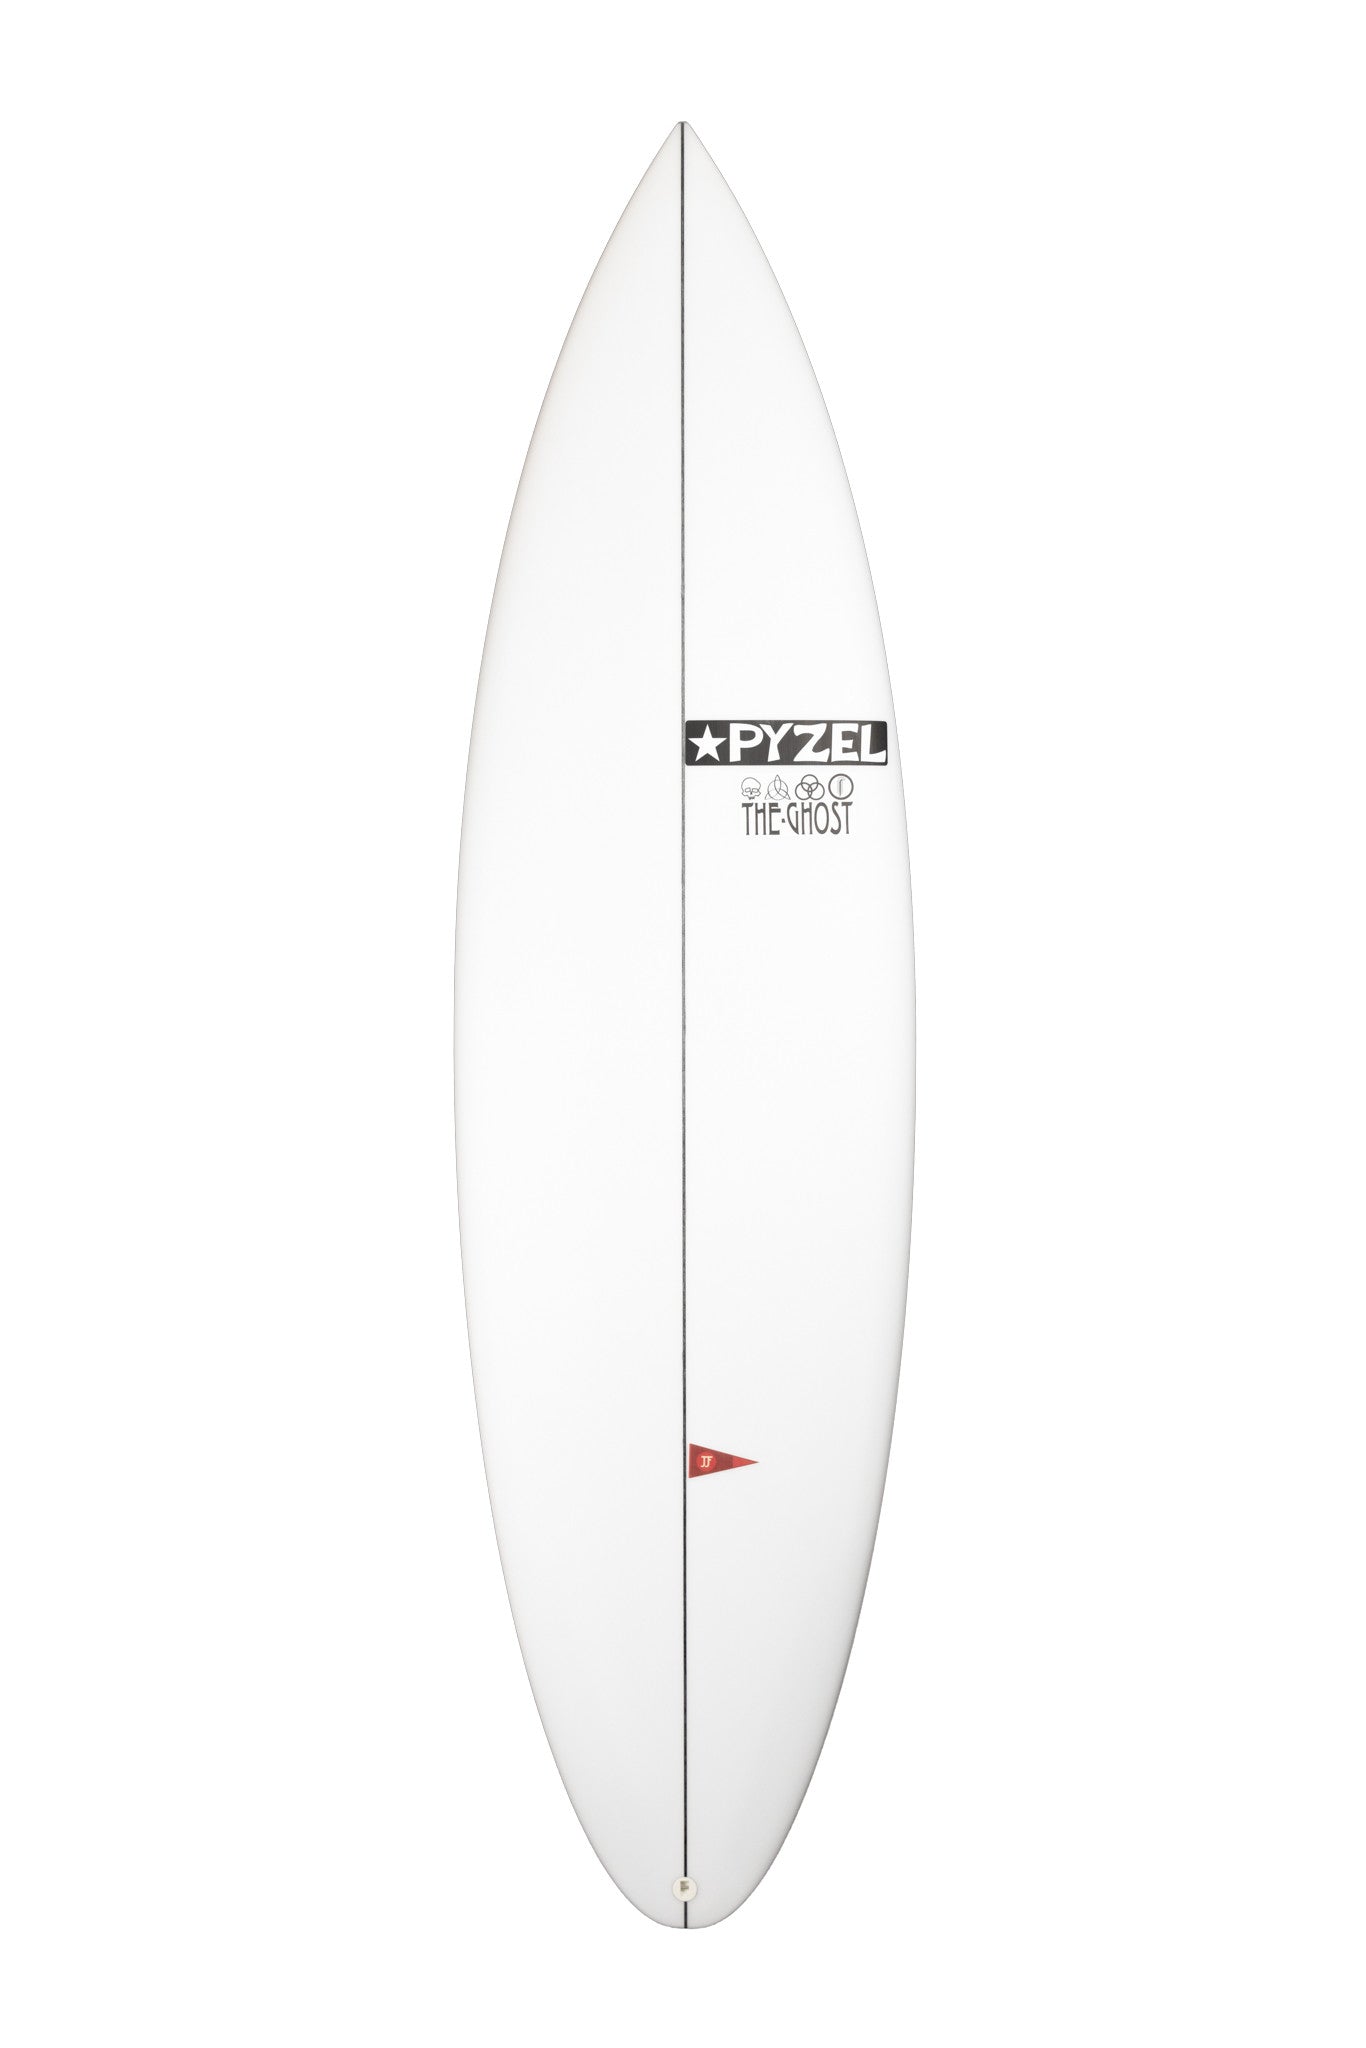 Pyzel Surfboards Ghost.